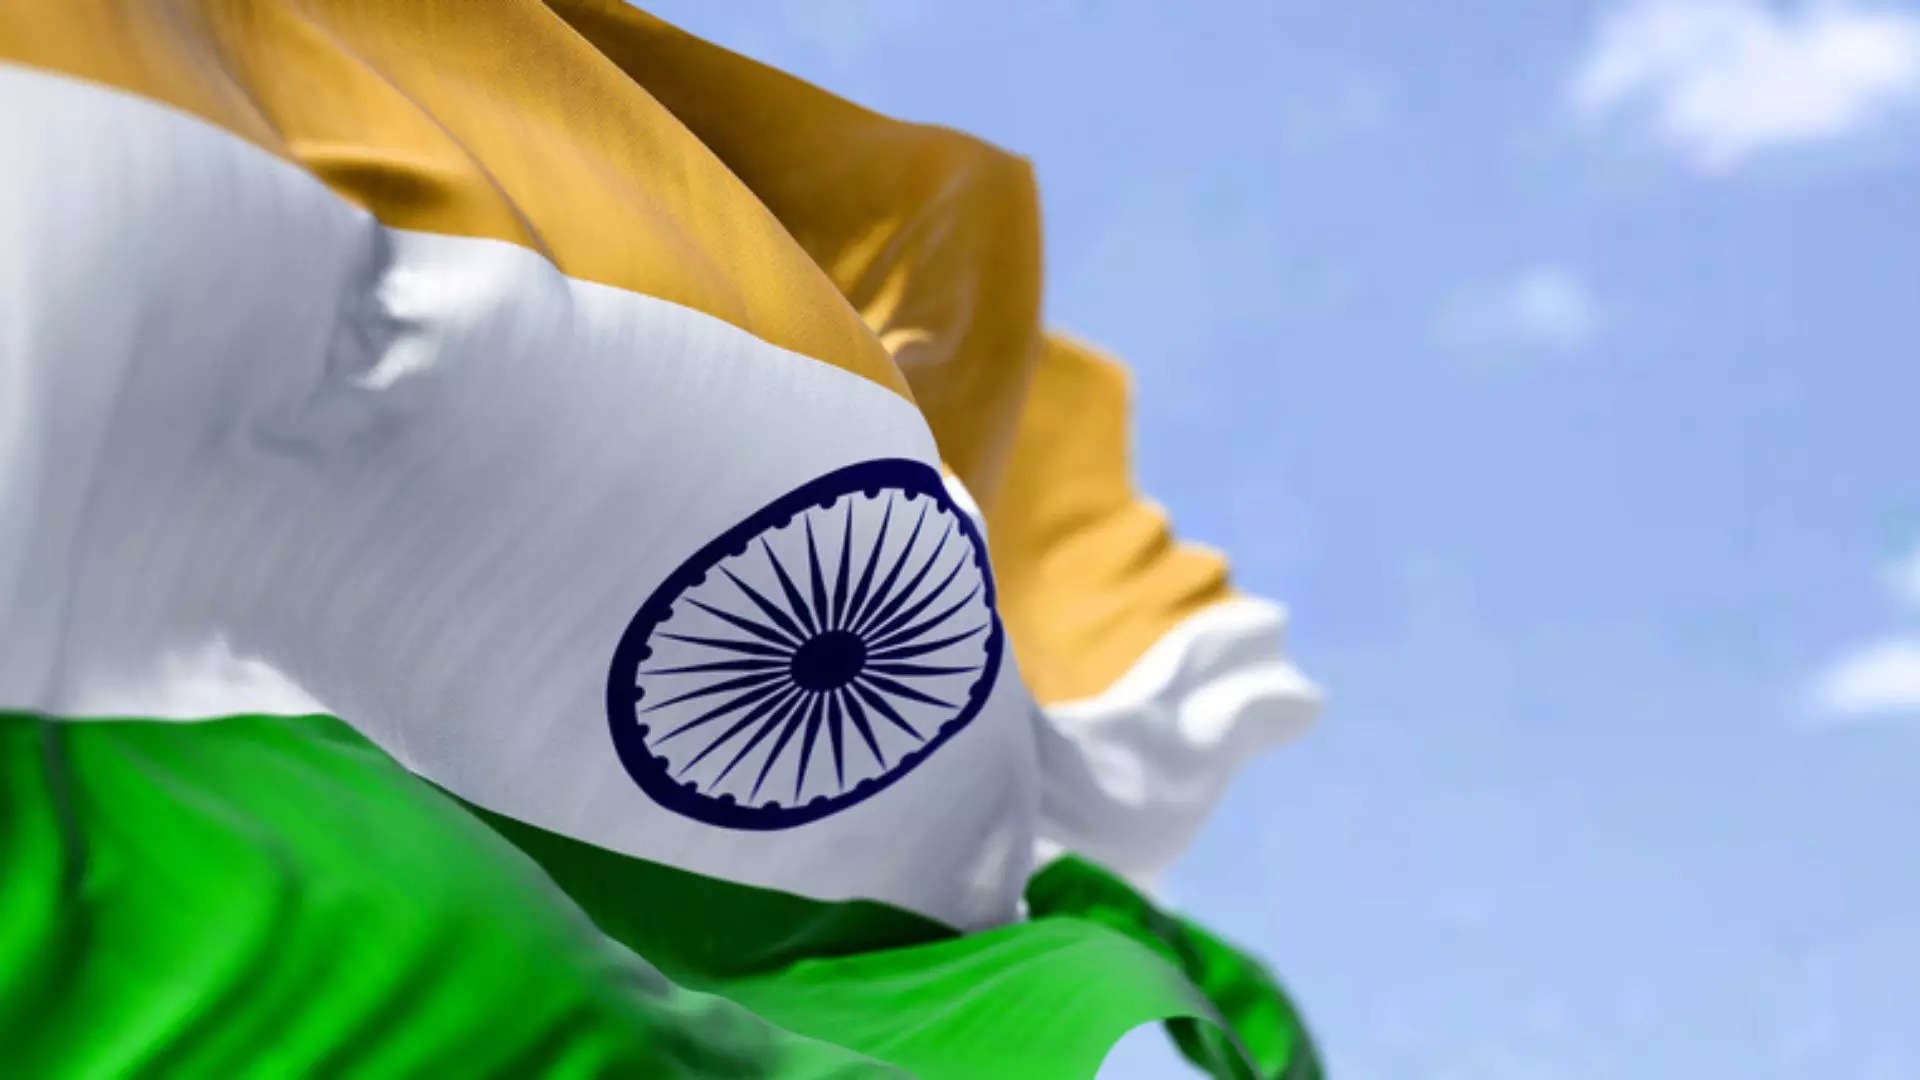 Governor of Massachusetts, Charlie Baker has proclaimed 75 years of Independence Day as India Day, which will be observed at India Street in Boston, Massachusetts on August 15, and at State House in Rhode Island on August 14.